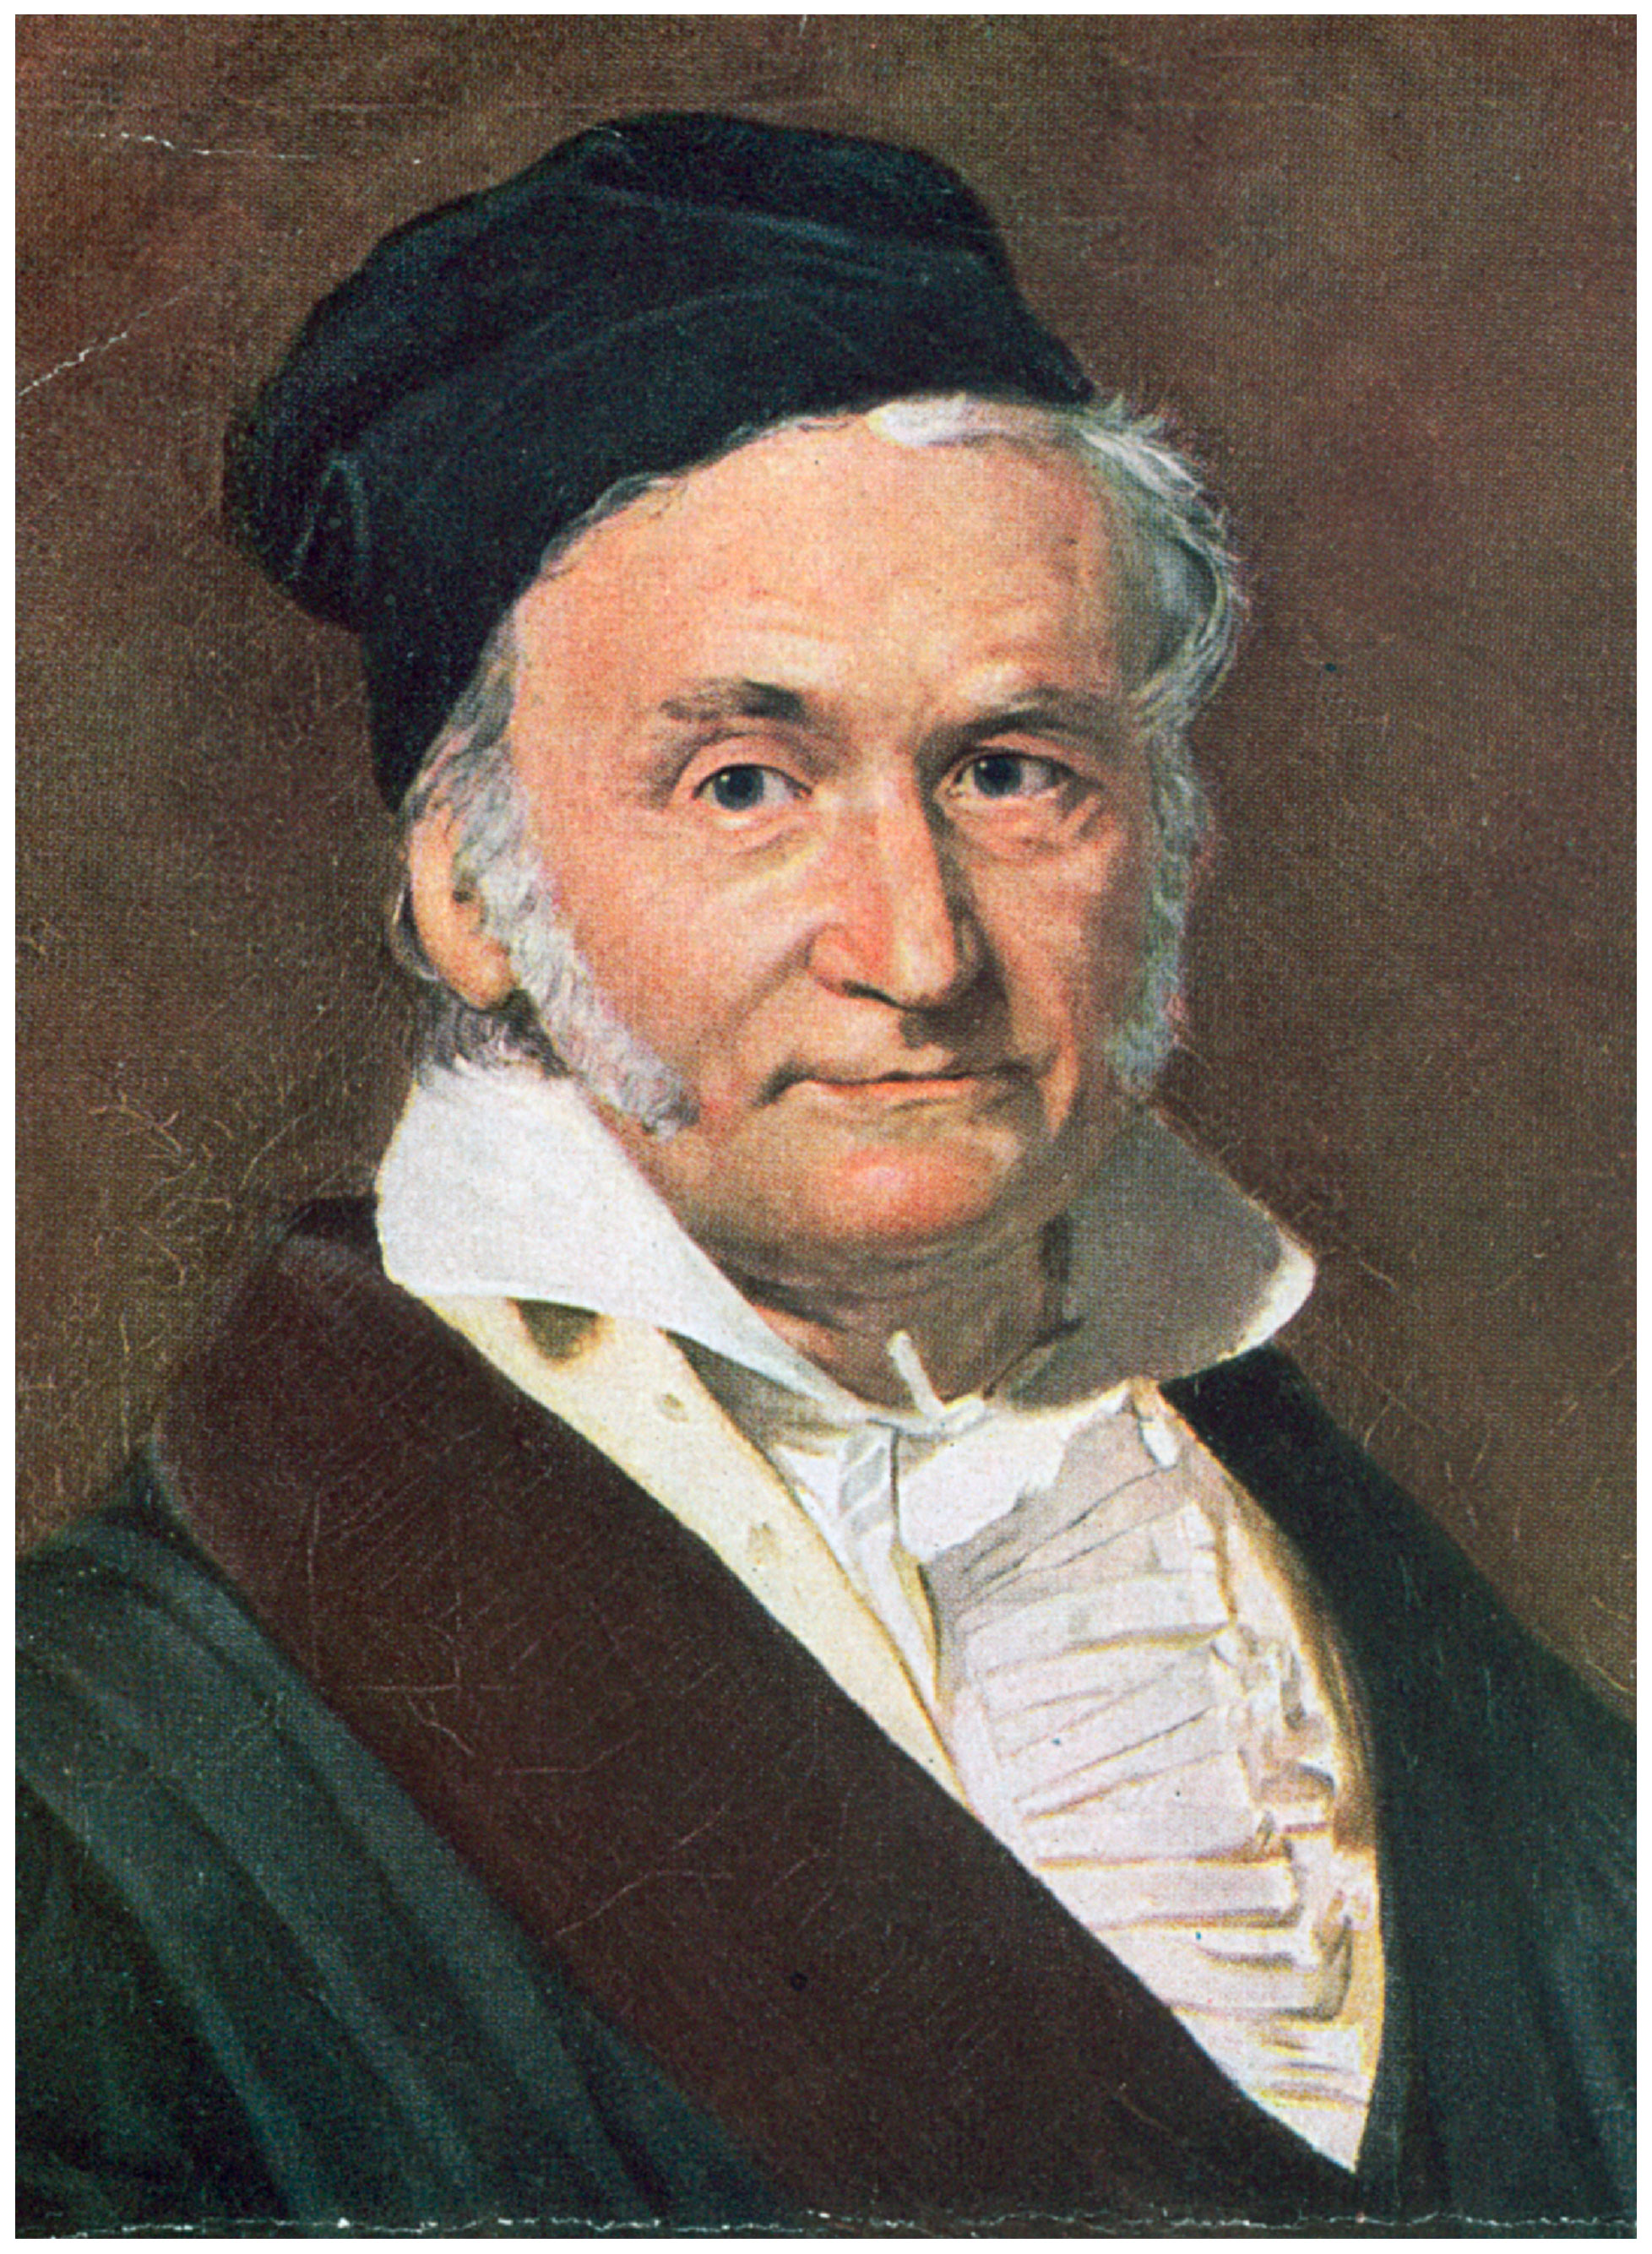 HGSS Carl Friedrich Gauss and the Gauss Society a brief overview